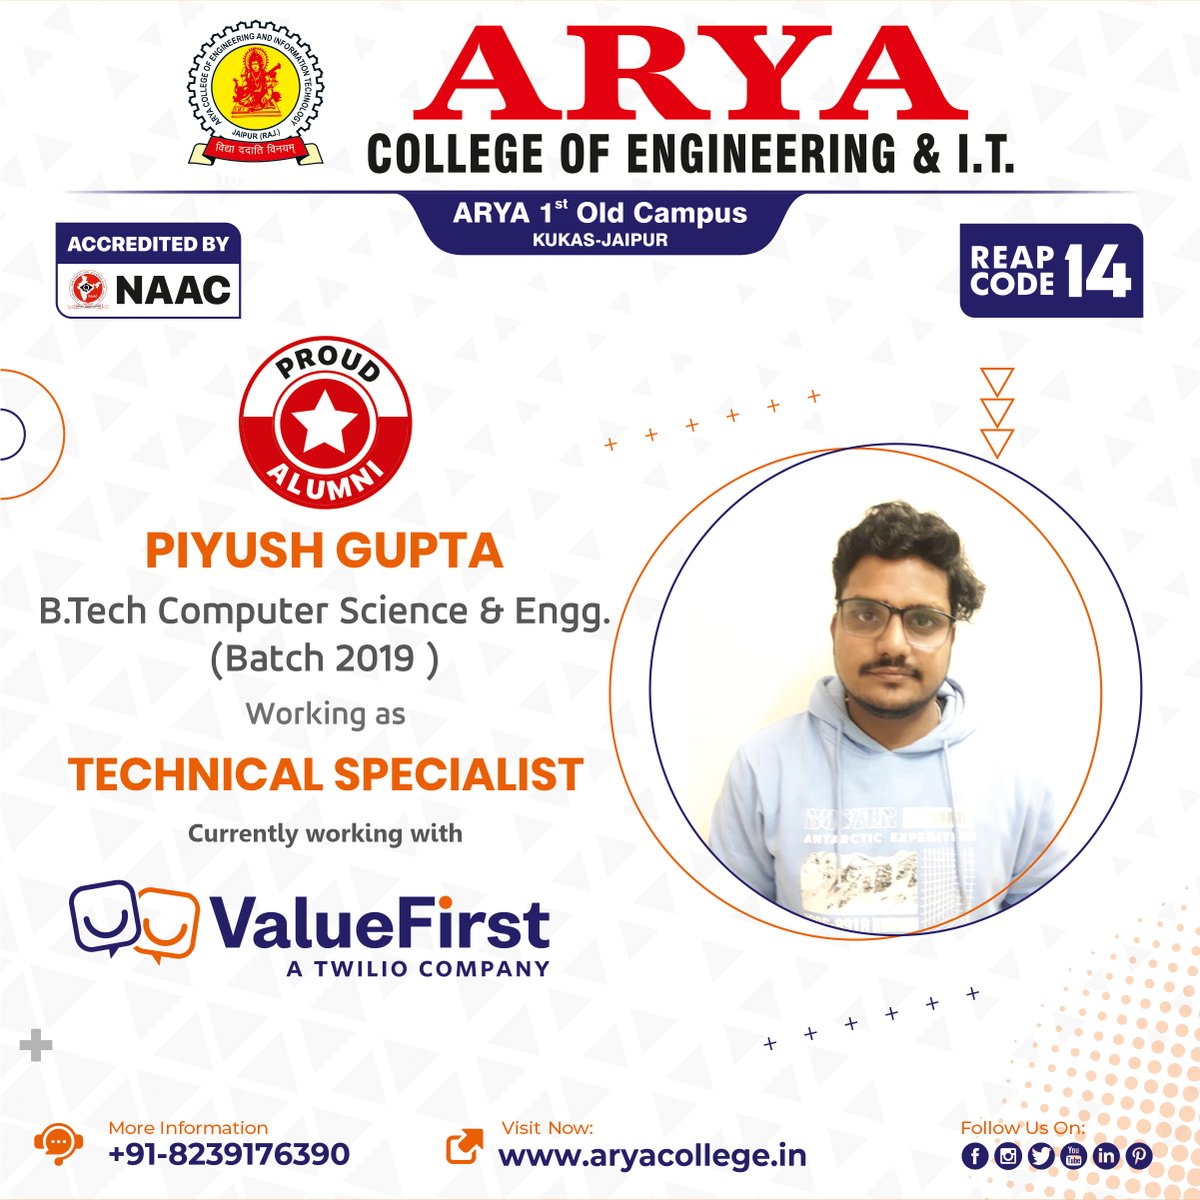 Proud moment for #Arya1stoldcampus as our Alumni from #BTech - CSE Batch-2019 Mr. Piyush Gupta is Working as Technical Specialist in ValueFirst, a Twilio Company. #AryaCollege of Engineering & IT is honored to have alumni like you. 

#ProudAlumni #AlumniAchievement